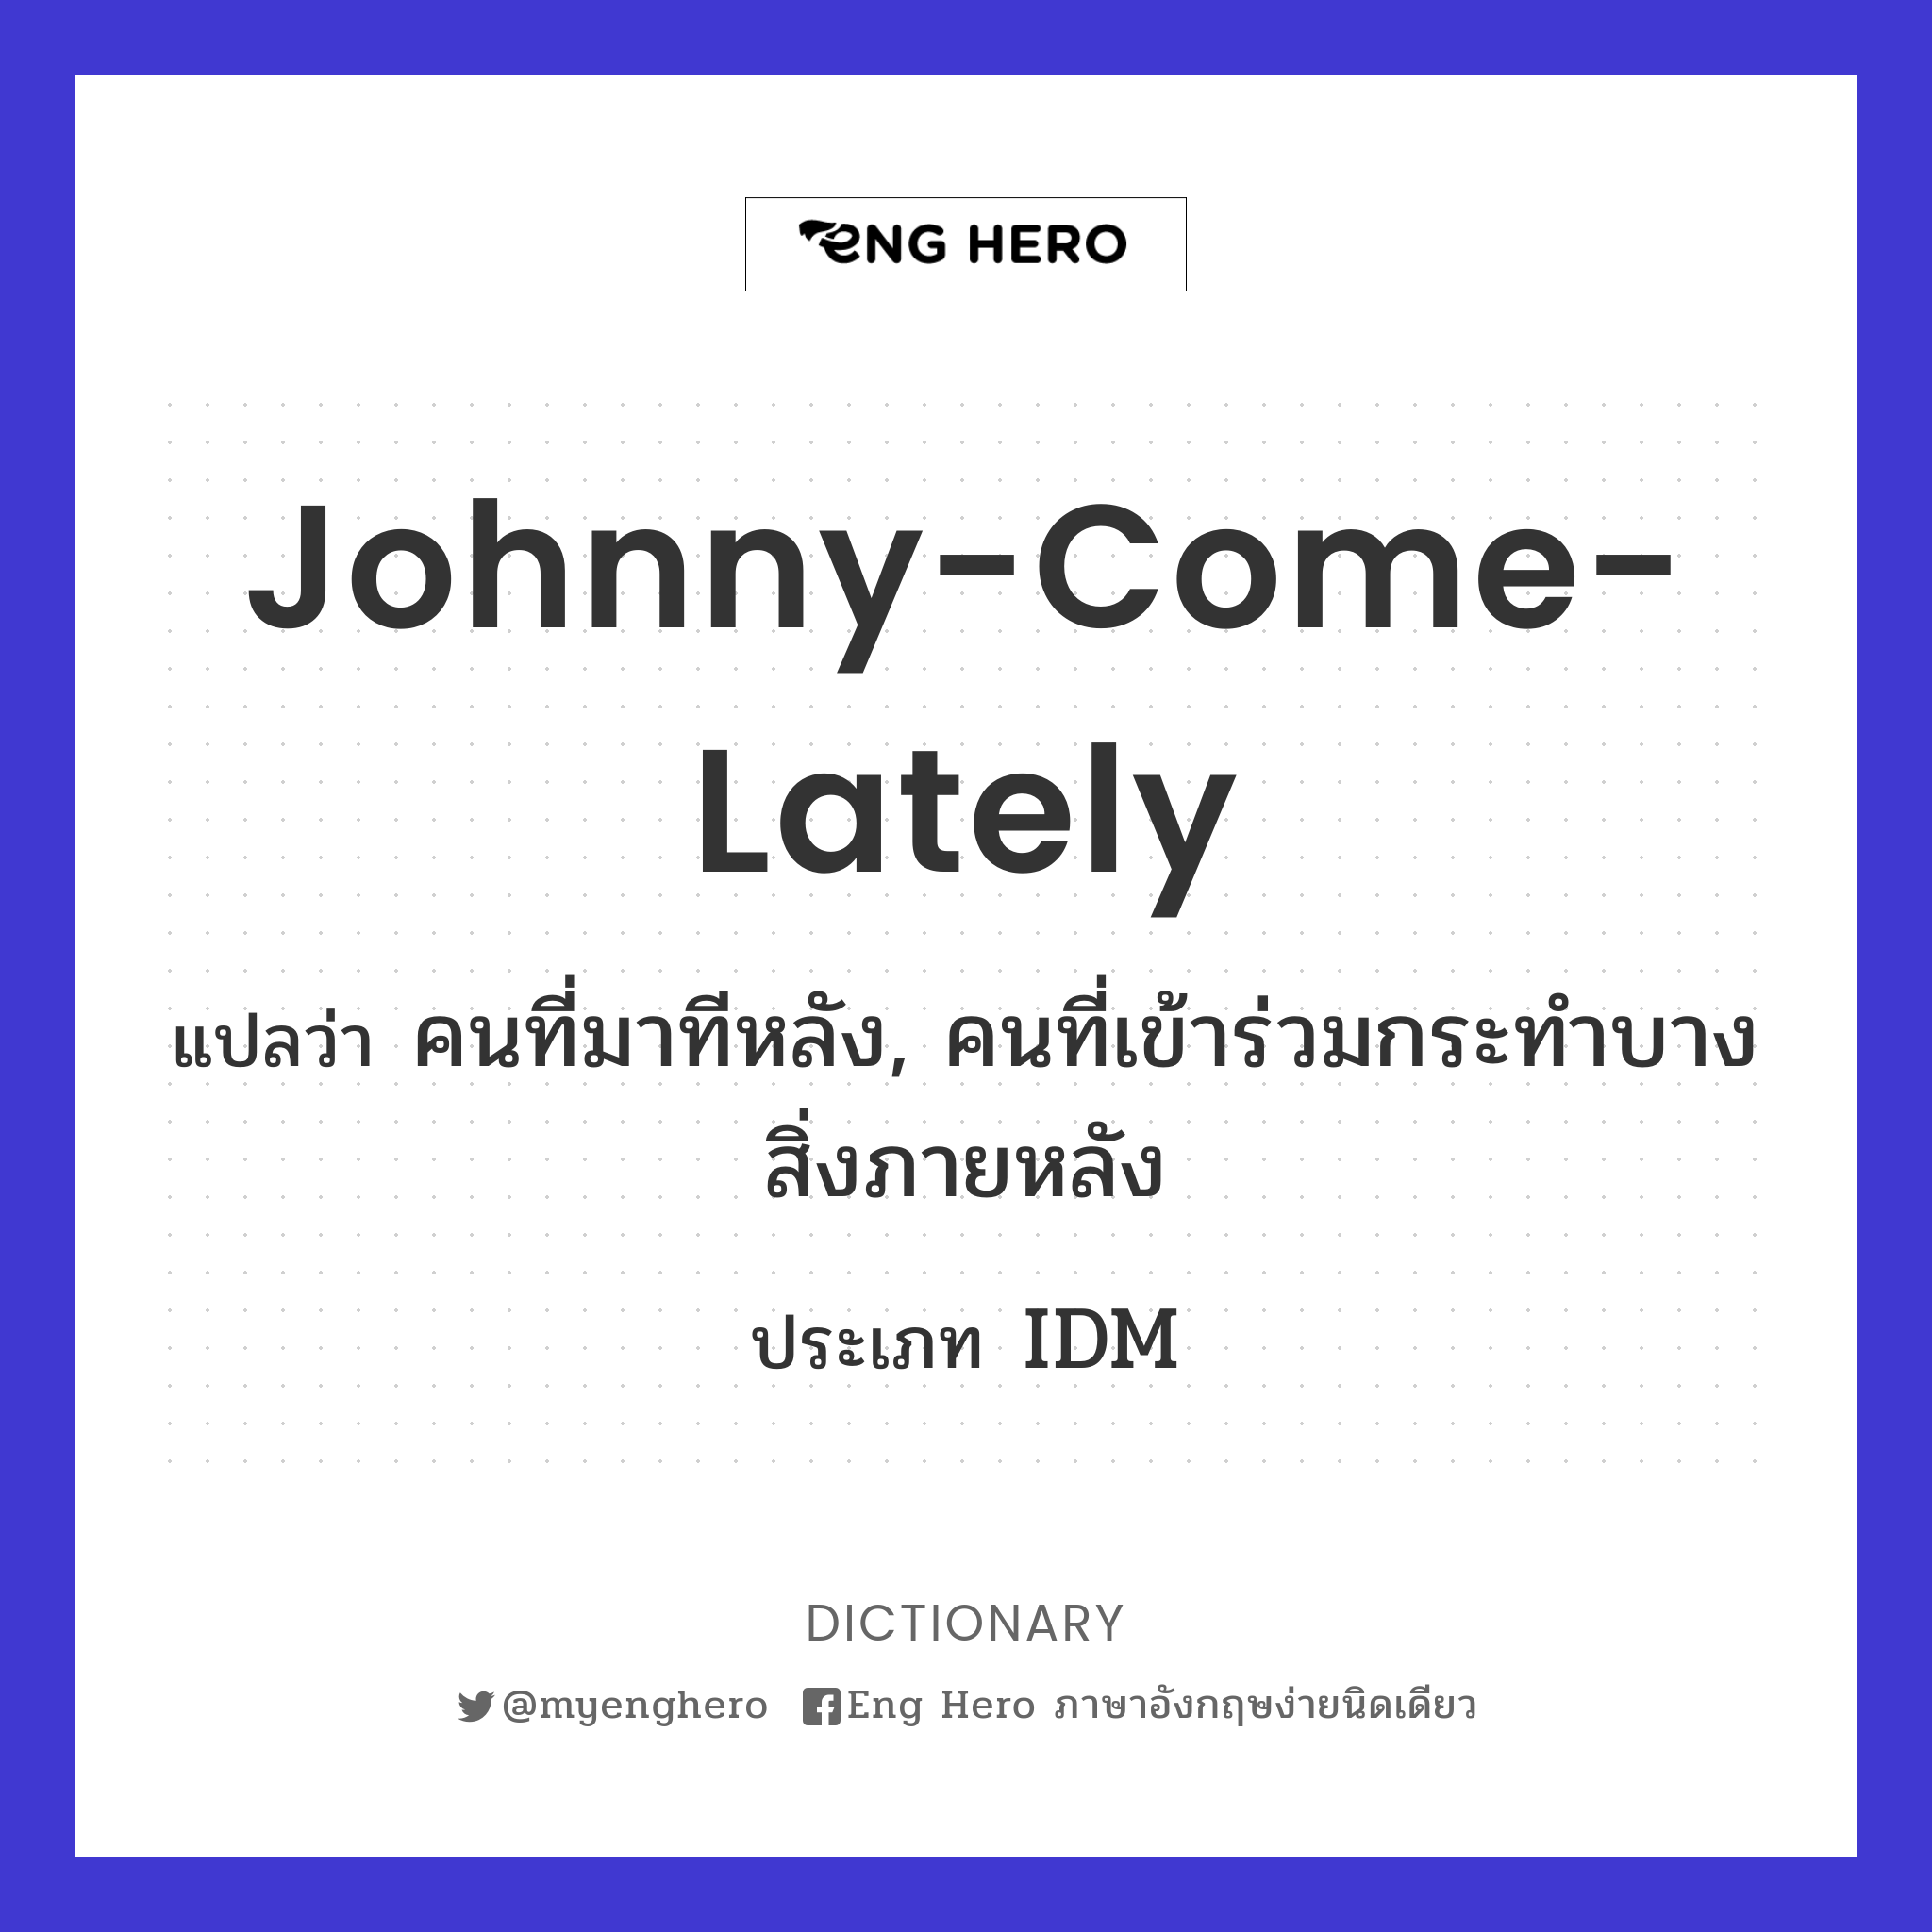 Johnny-come-lately